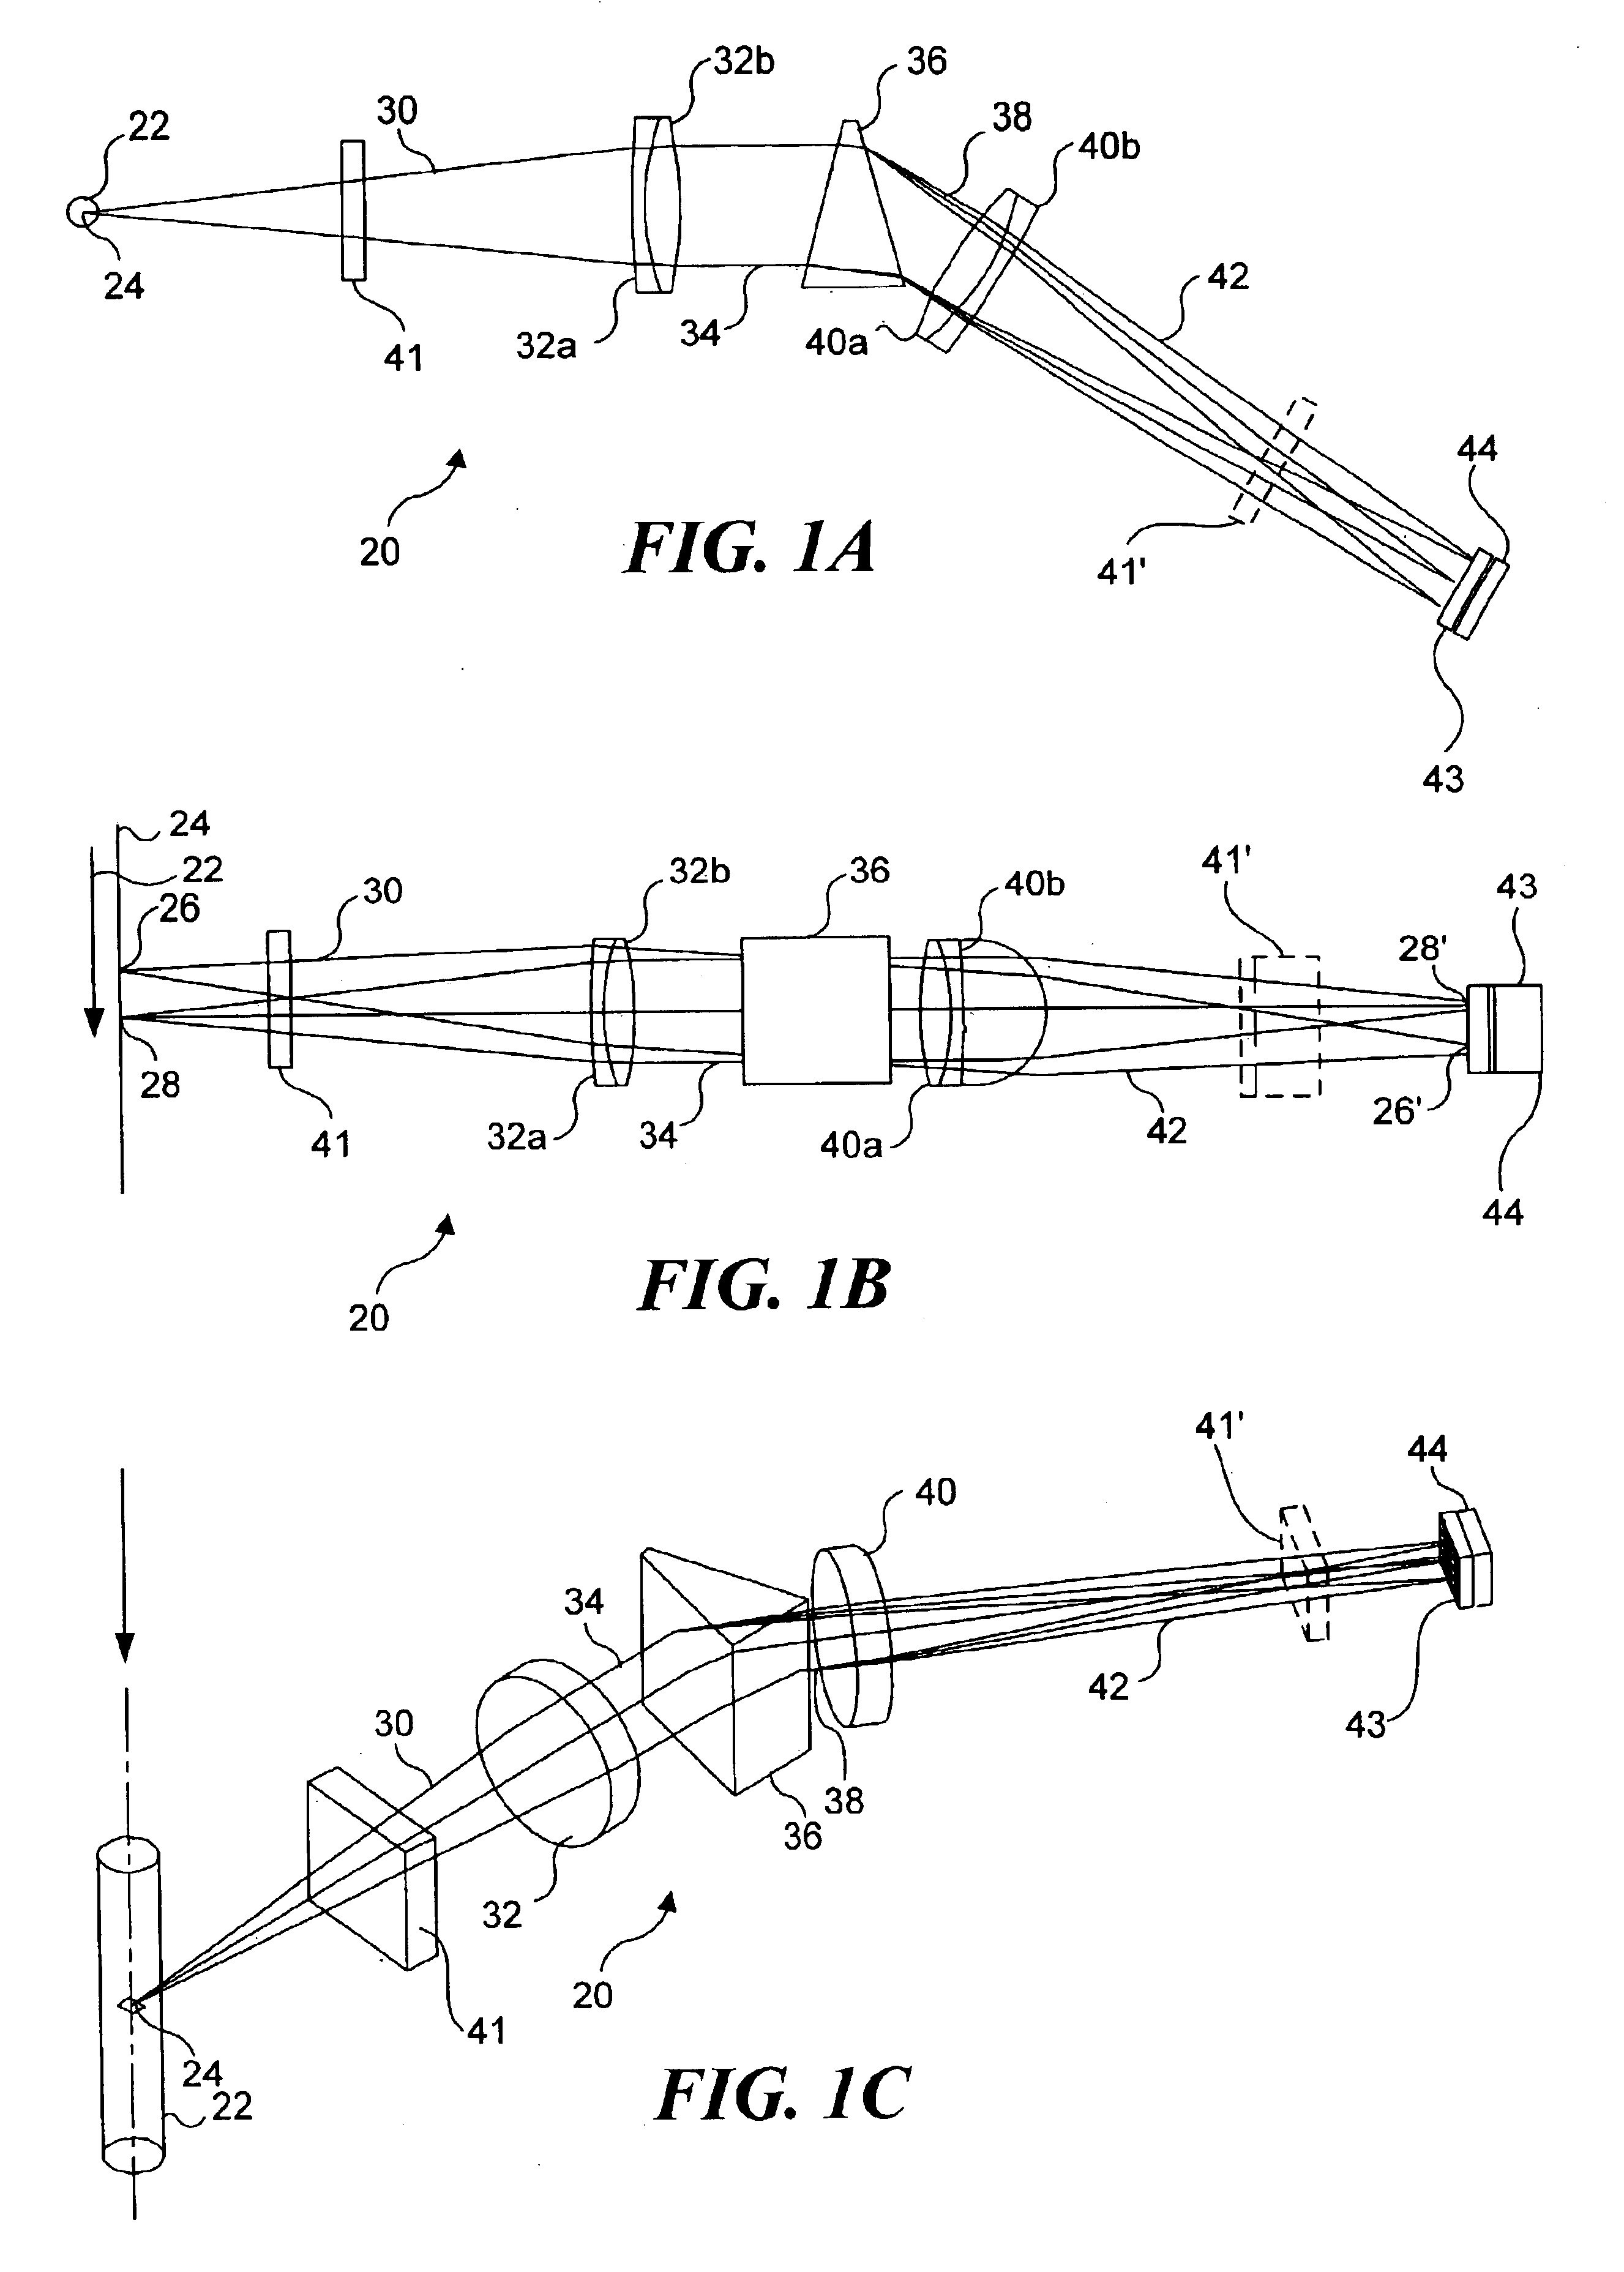 Alternative detector configuration and mode of operation of a time delay integration particle analyzer